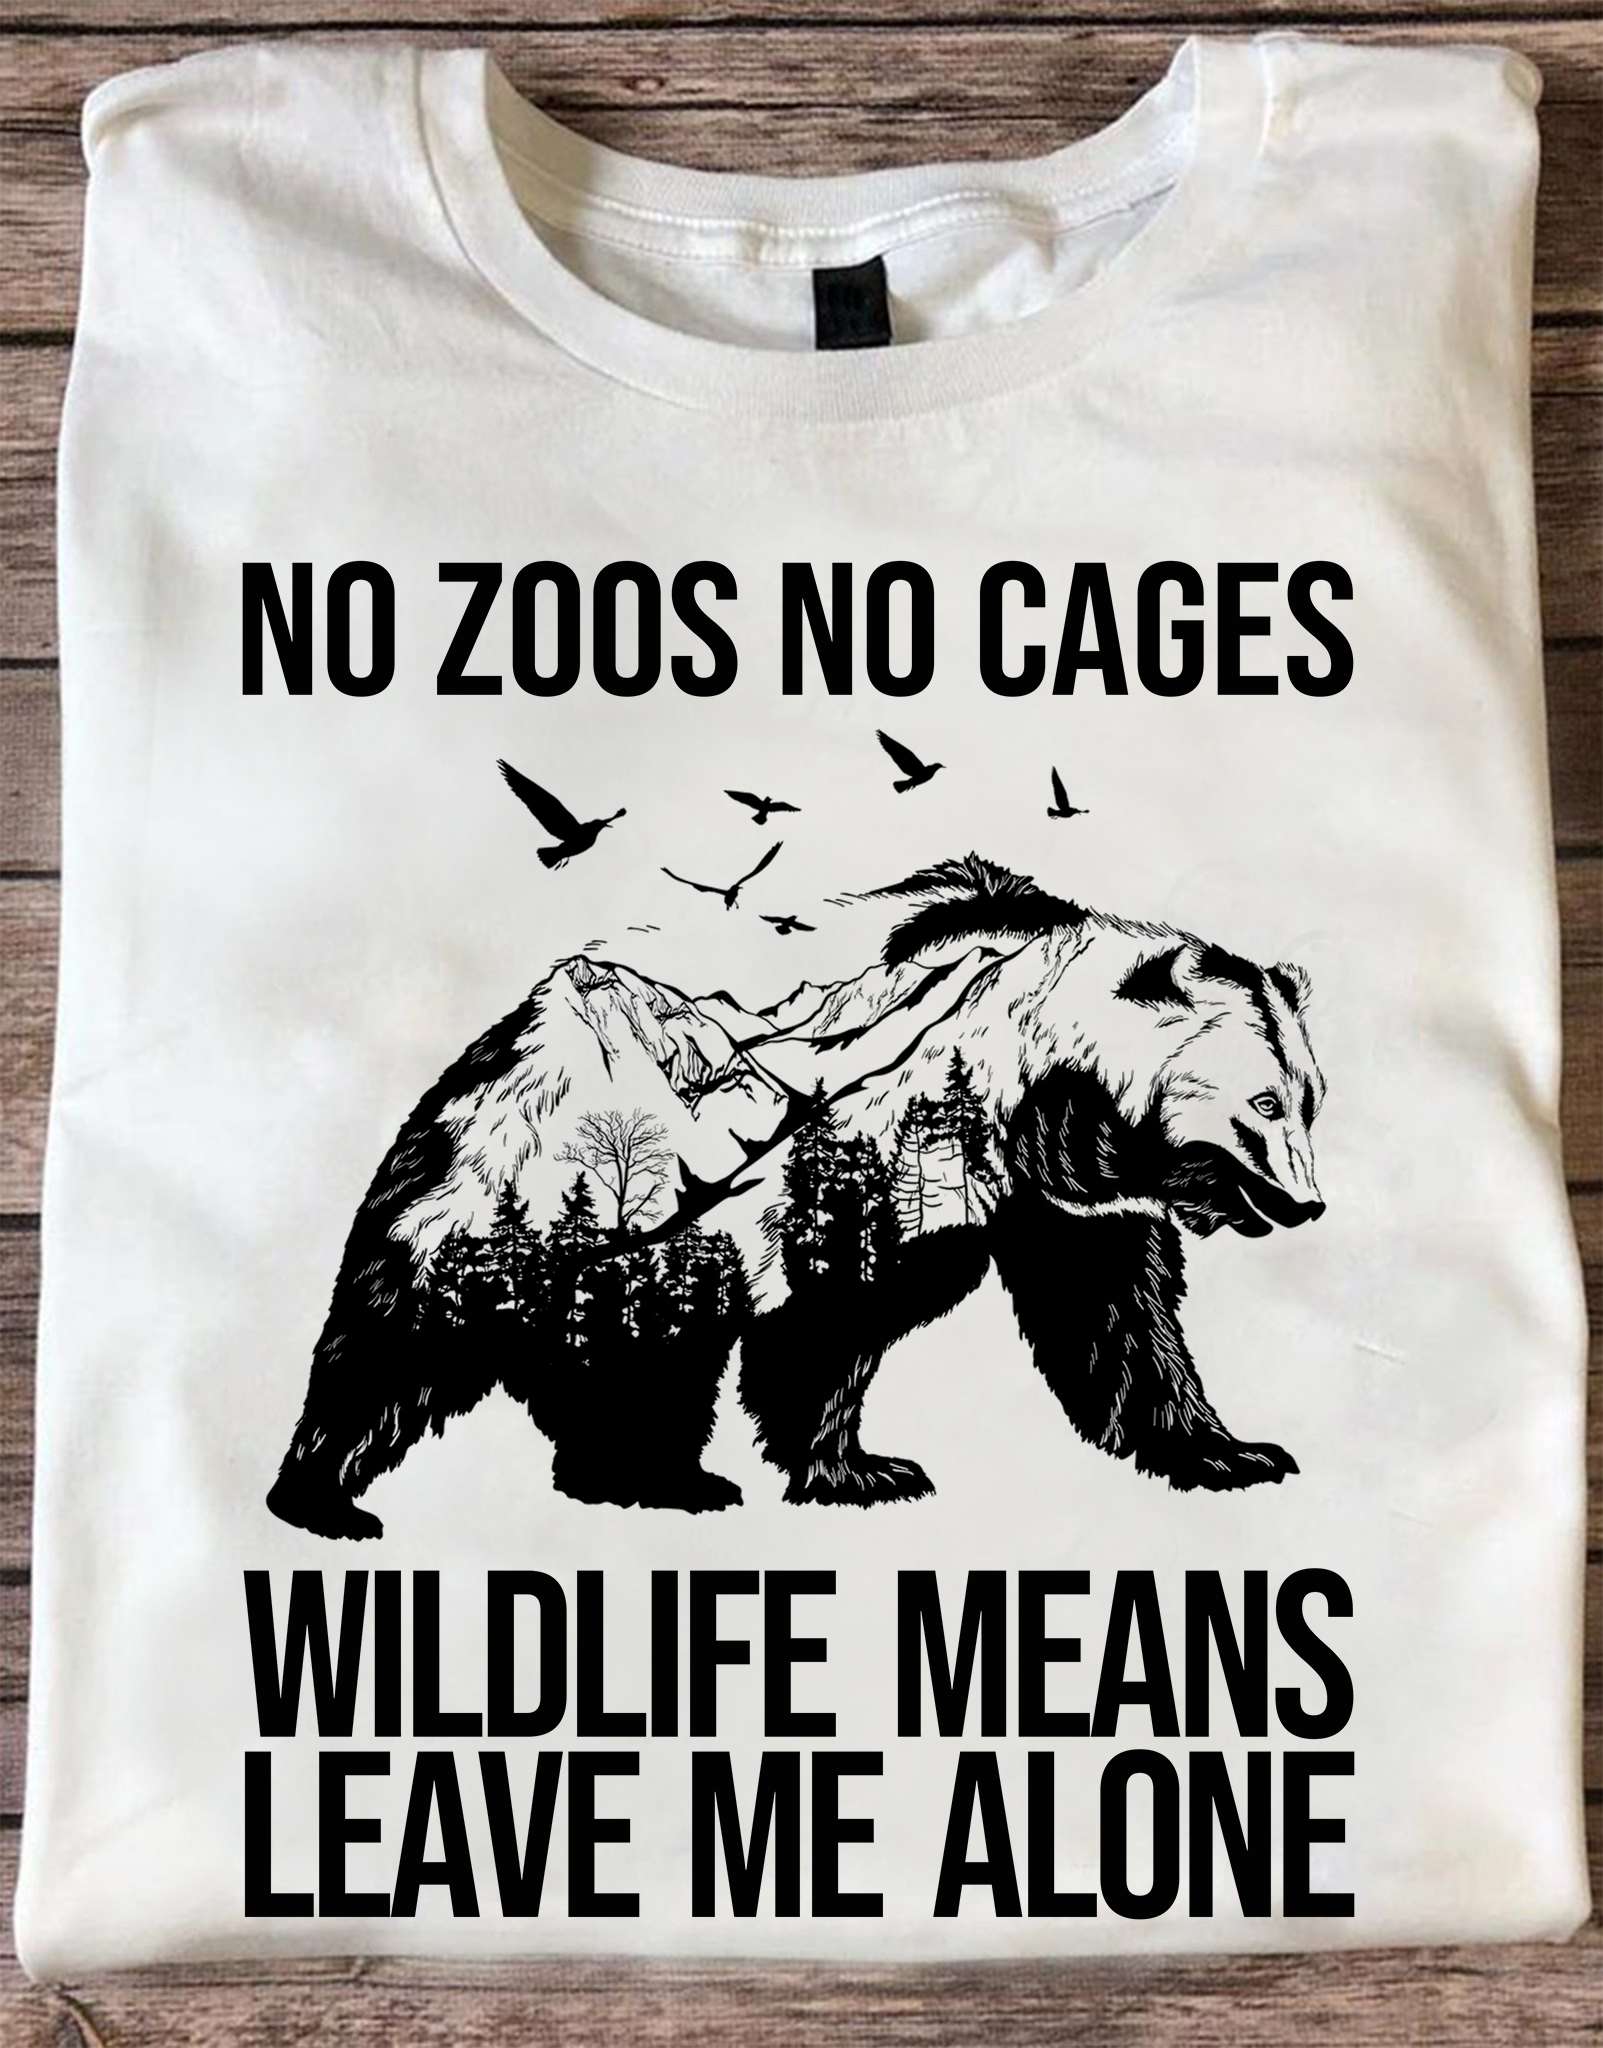 No zoos no cages wildlife means leave me alone - Wild life bear